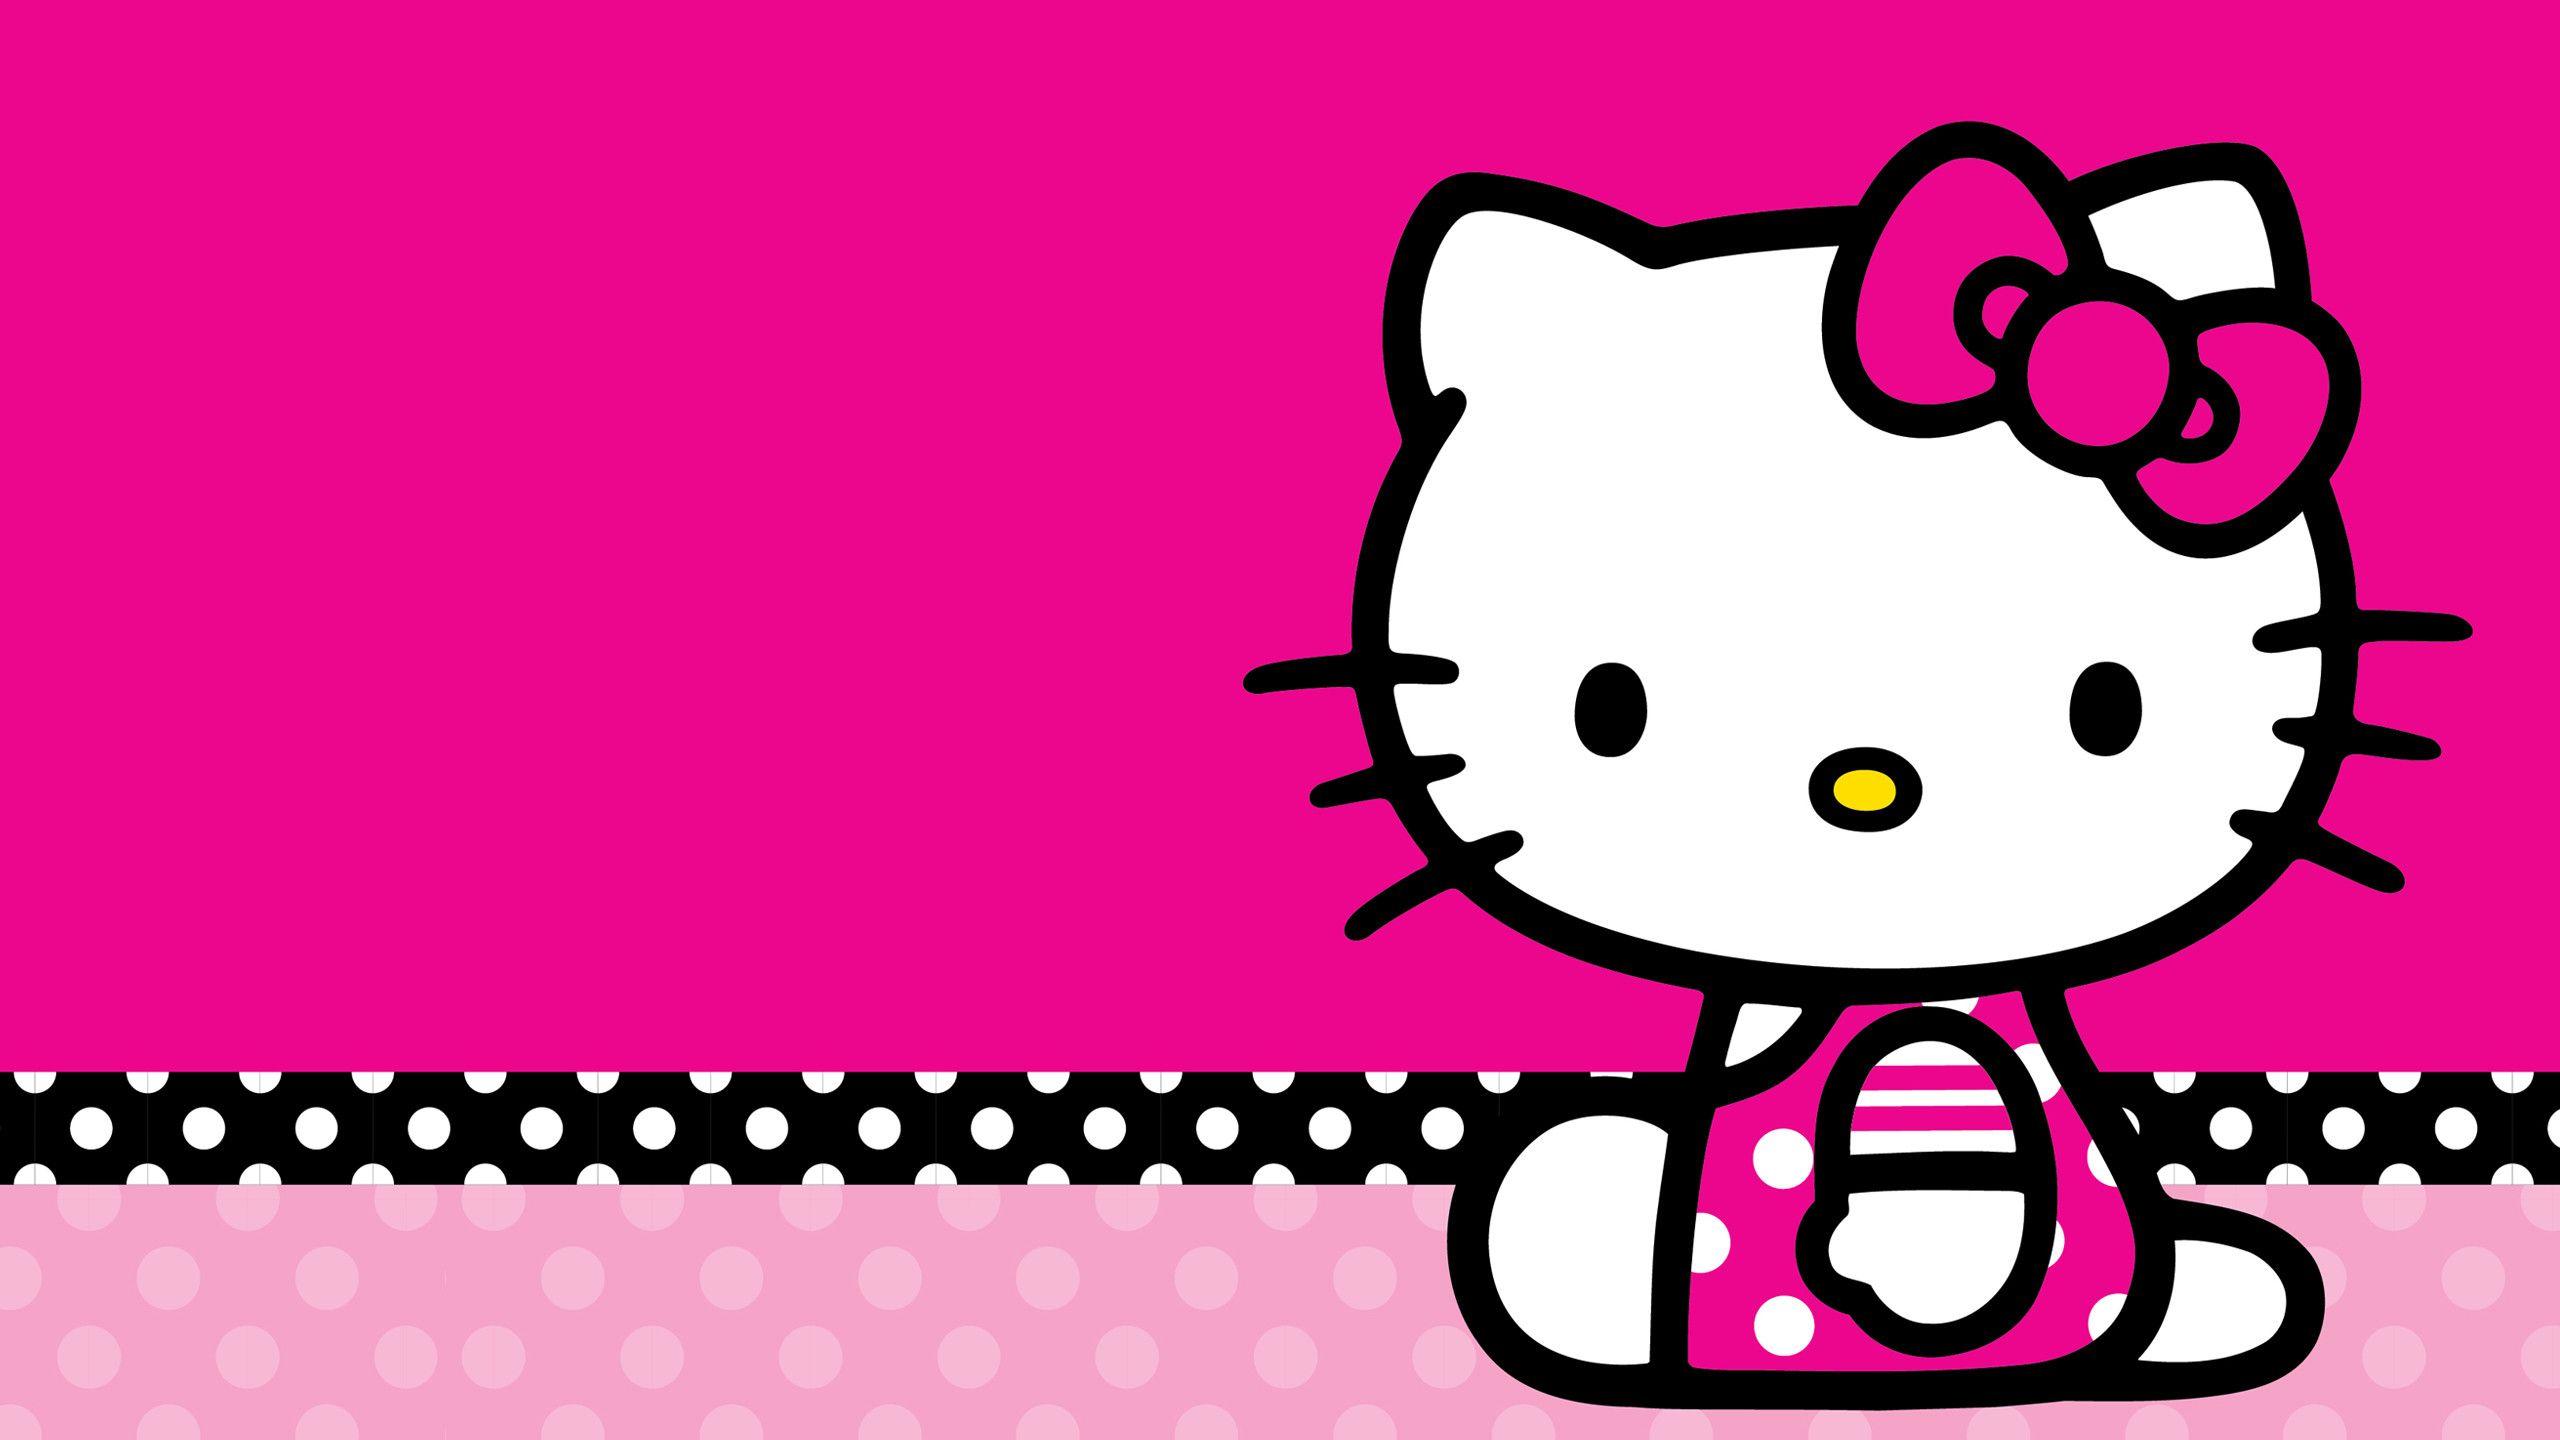 Black And Pink Hello Kitty Wallpapers Top Free Black And Pink Hello Kitty Backgrounds Wallpaperaccess